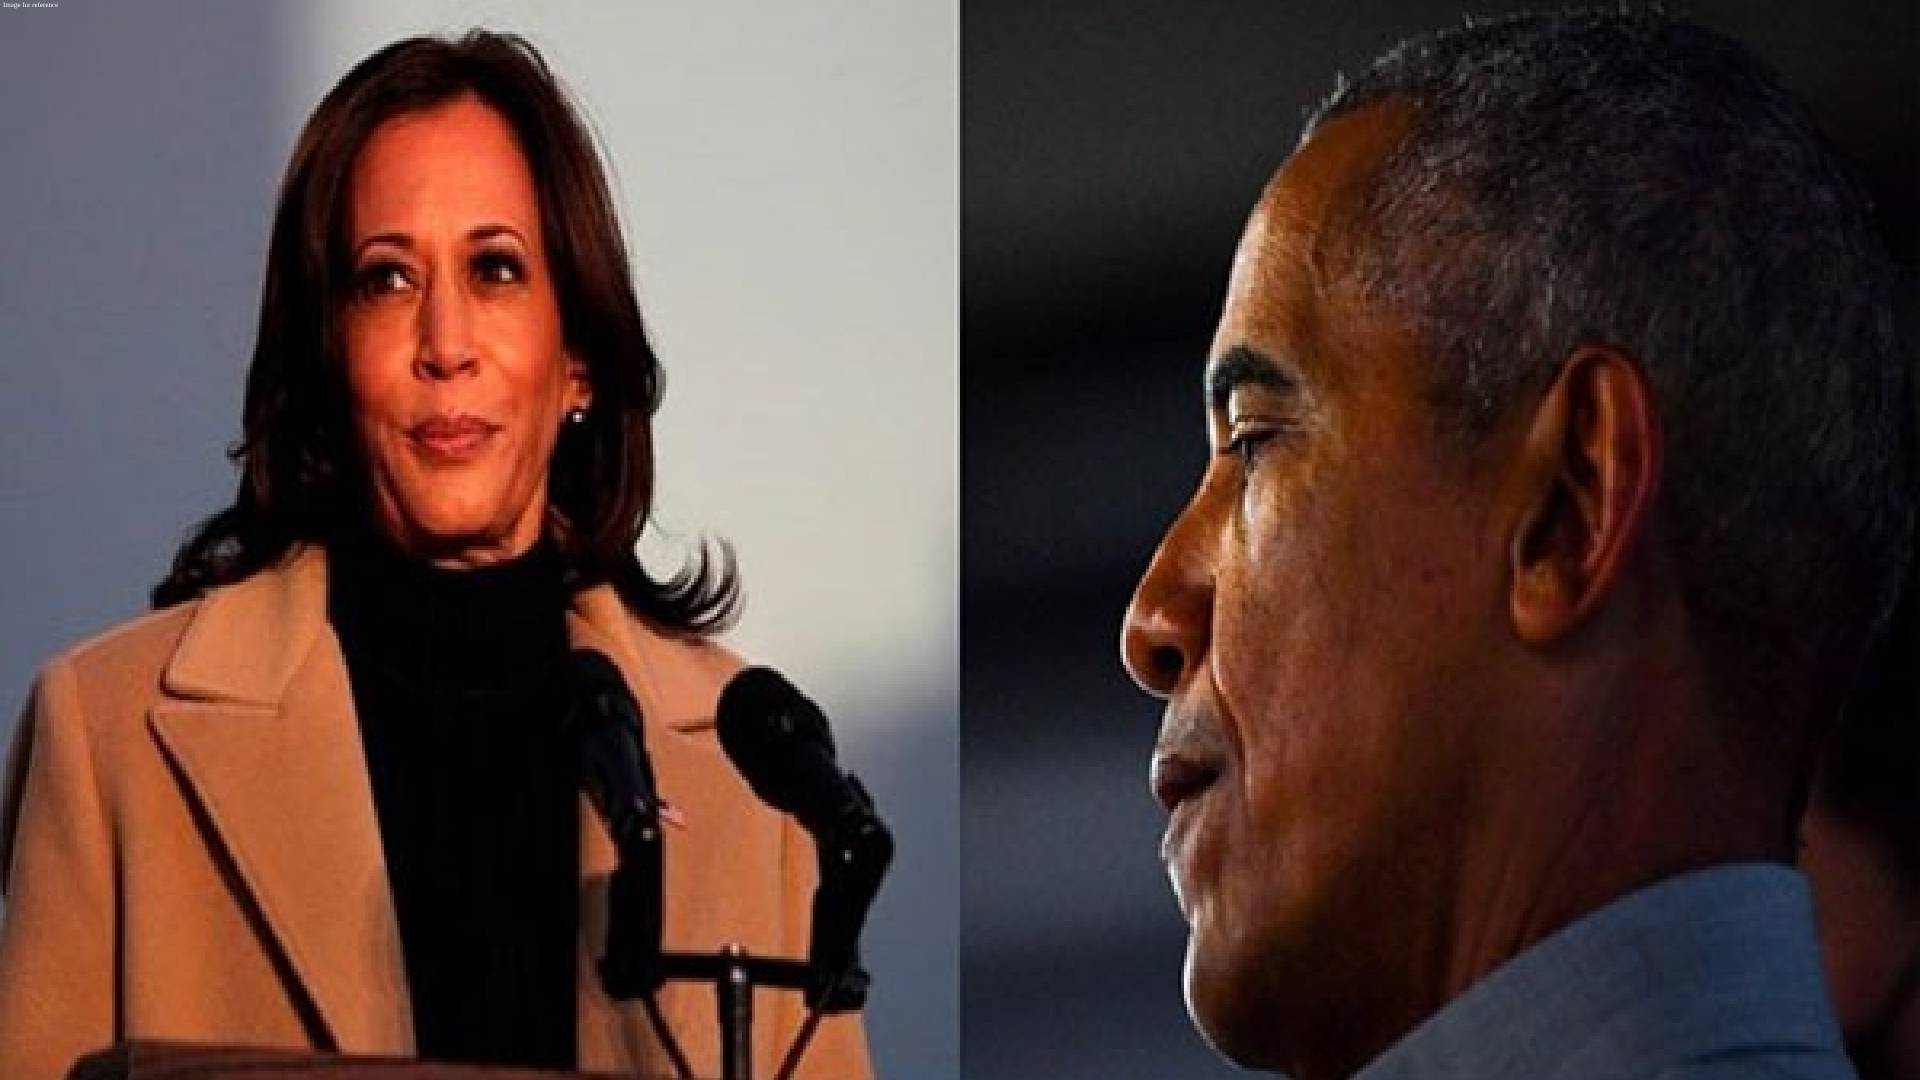 US leaders condemn shooting at Trump's rally: VP Harris, former President Obama call for unity